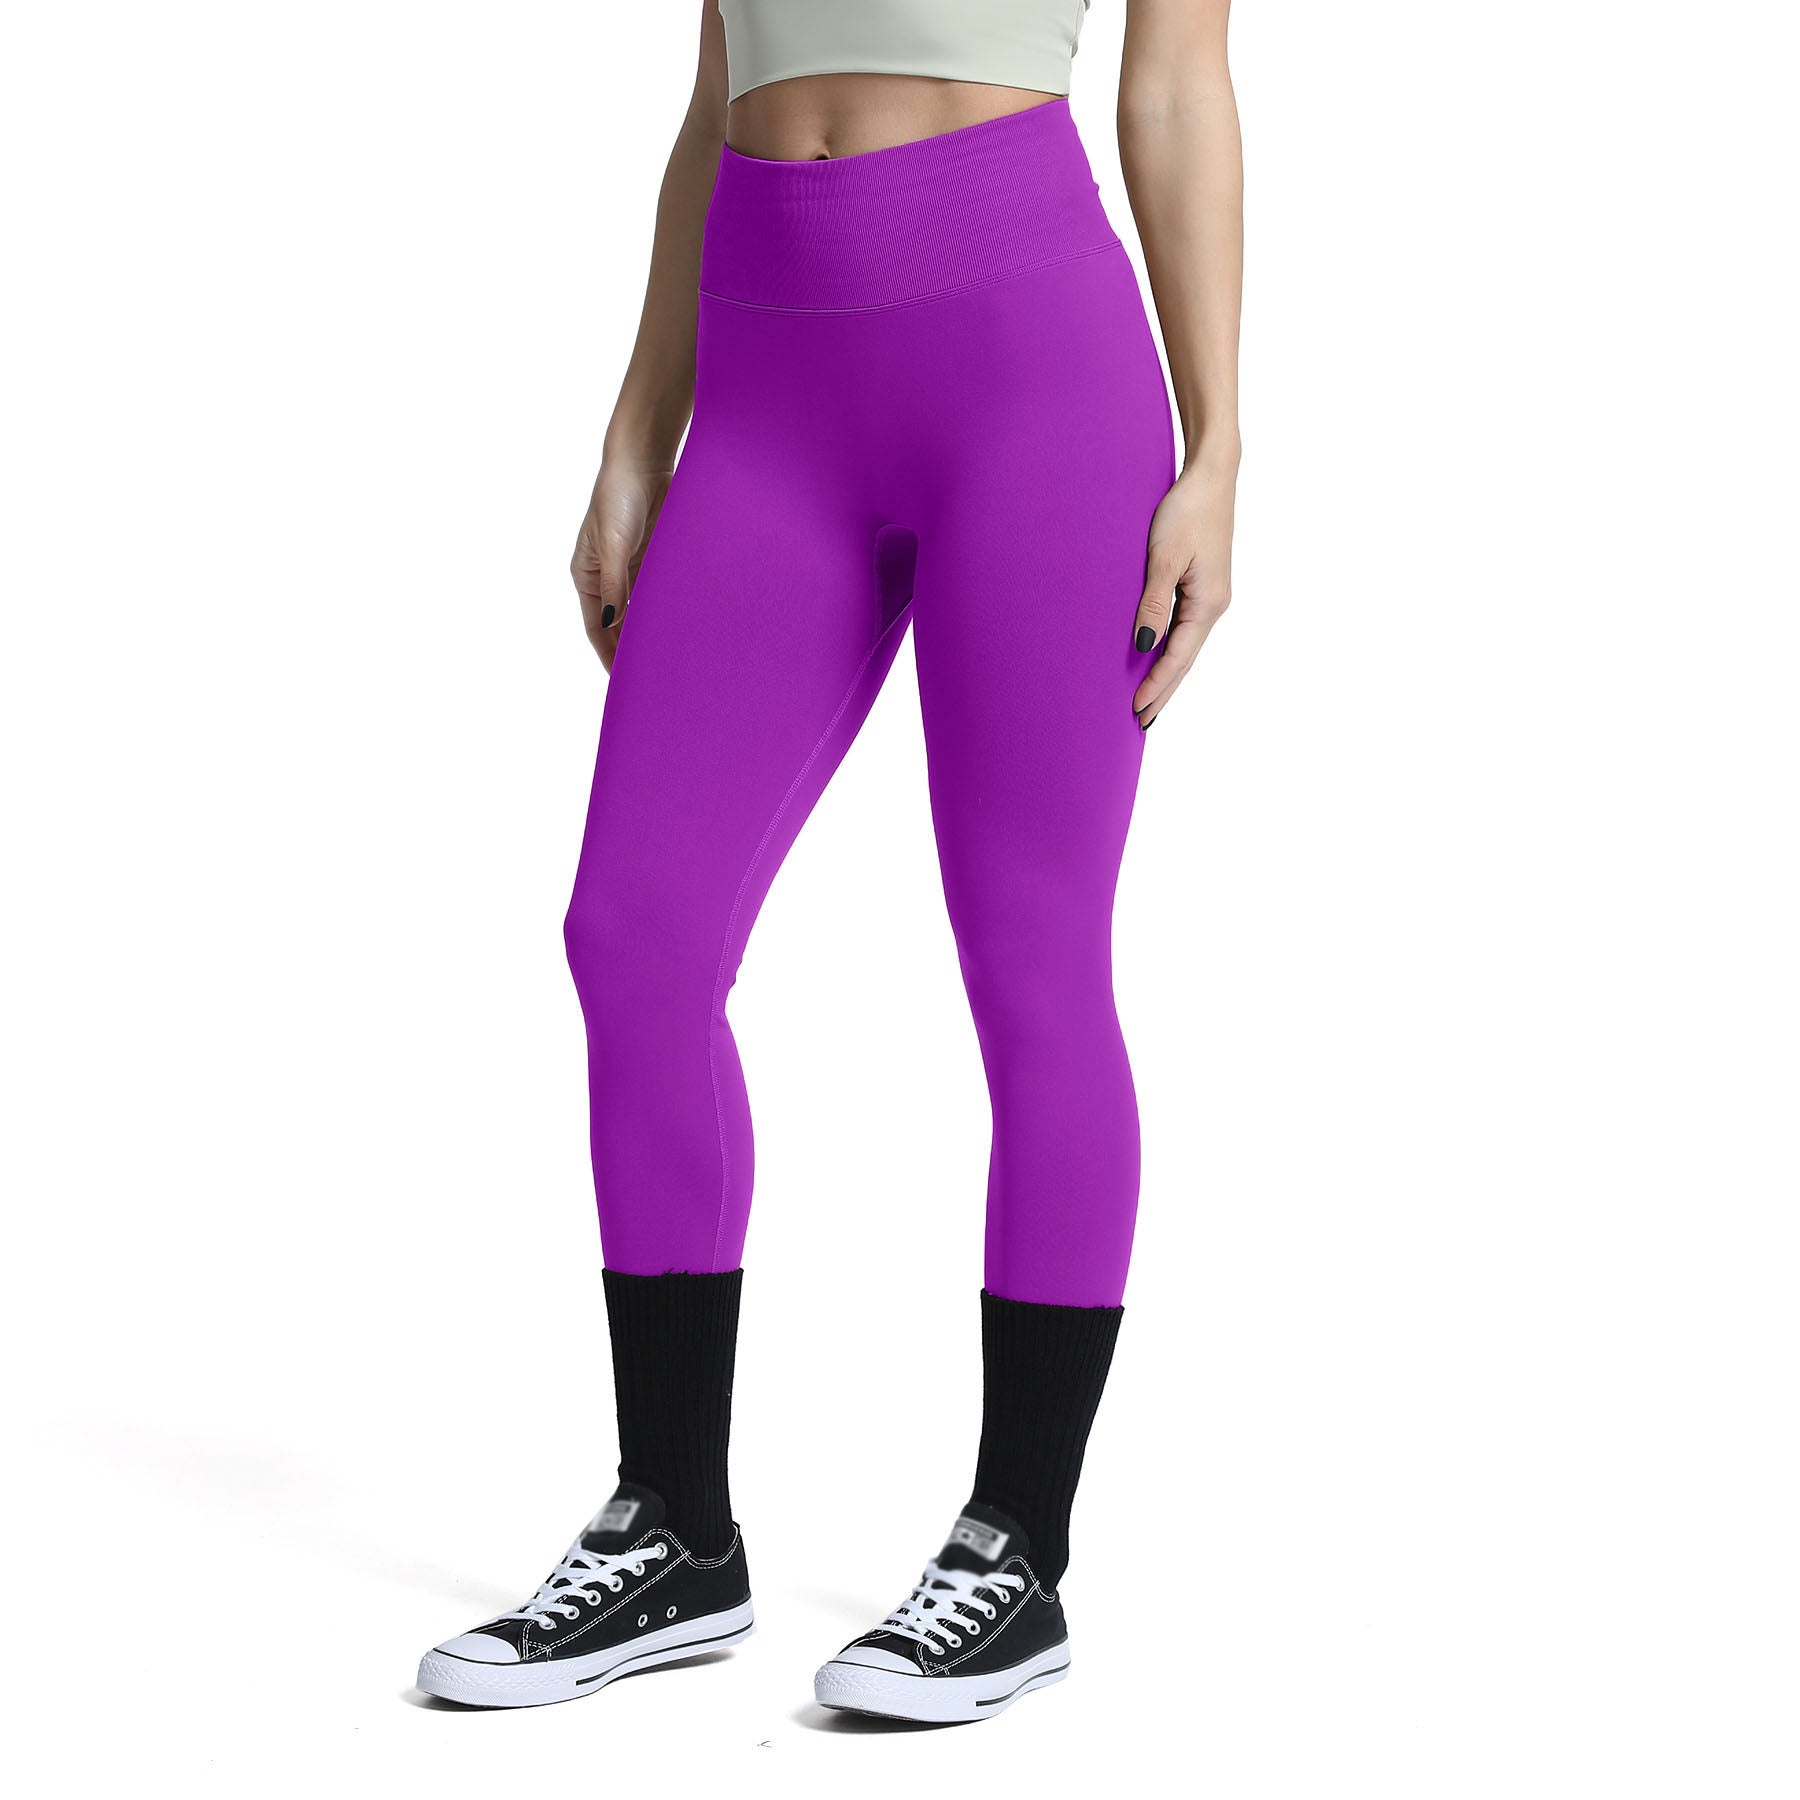 Compression Leggings for Women 20-30mmHg by Absolute Support - Purple,  Small - Walmart.com